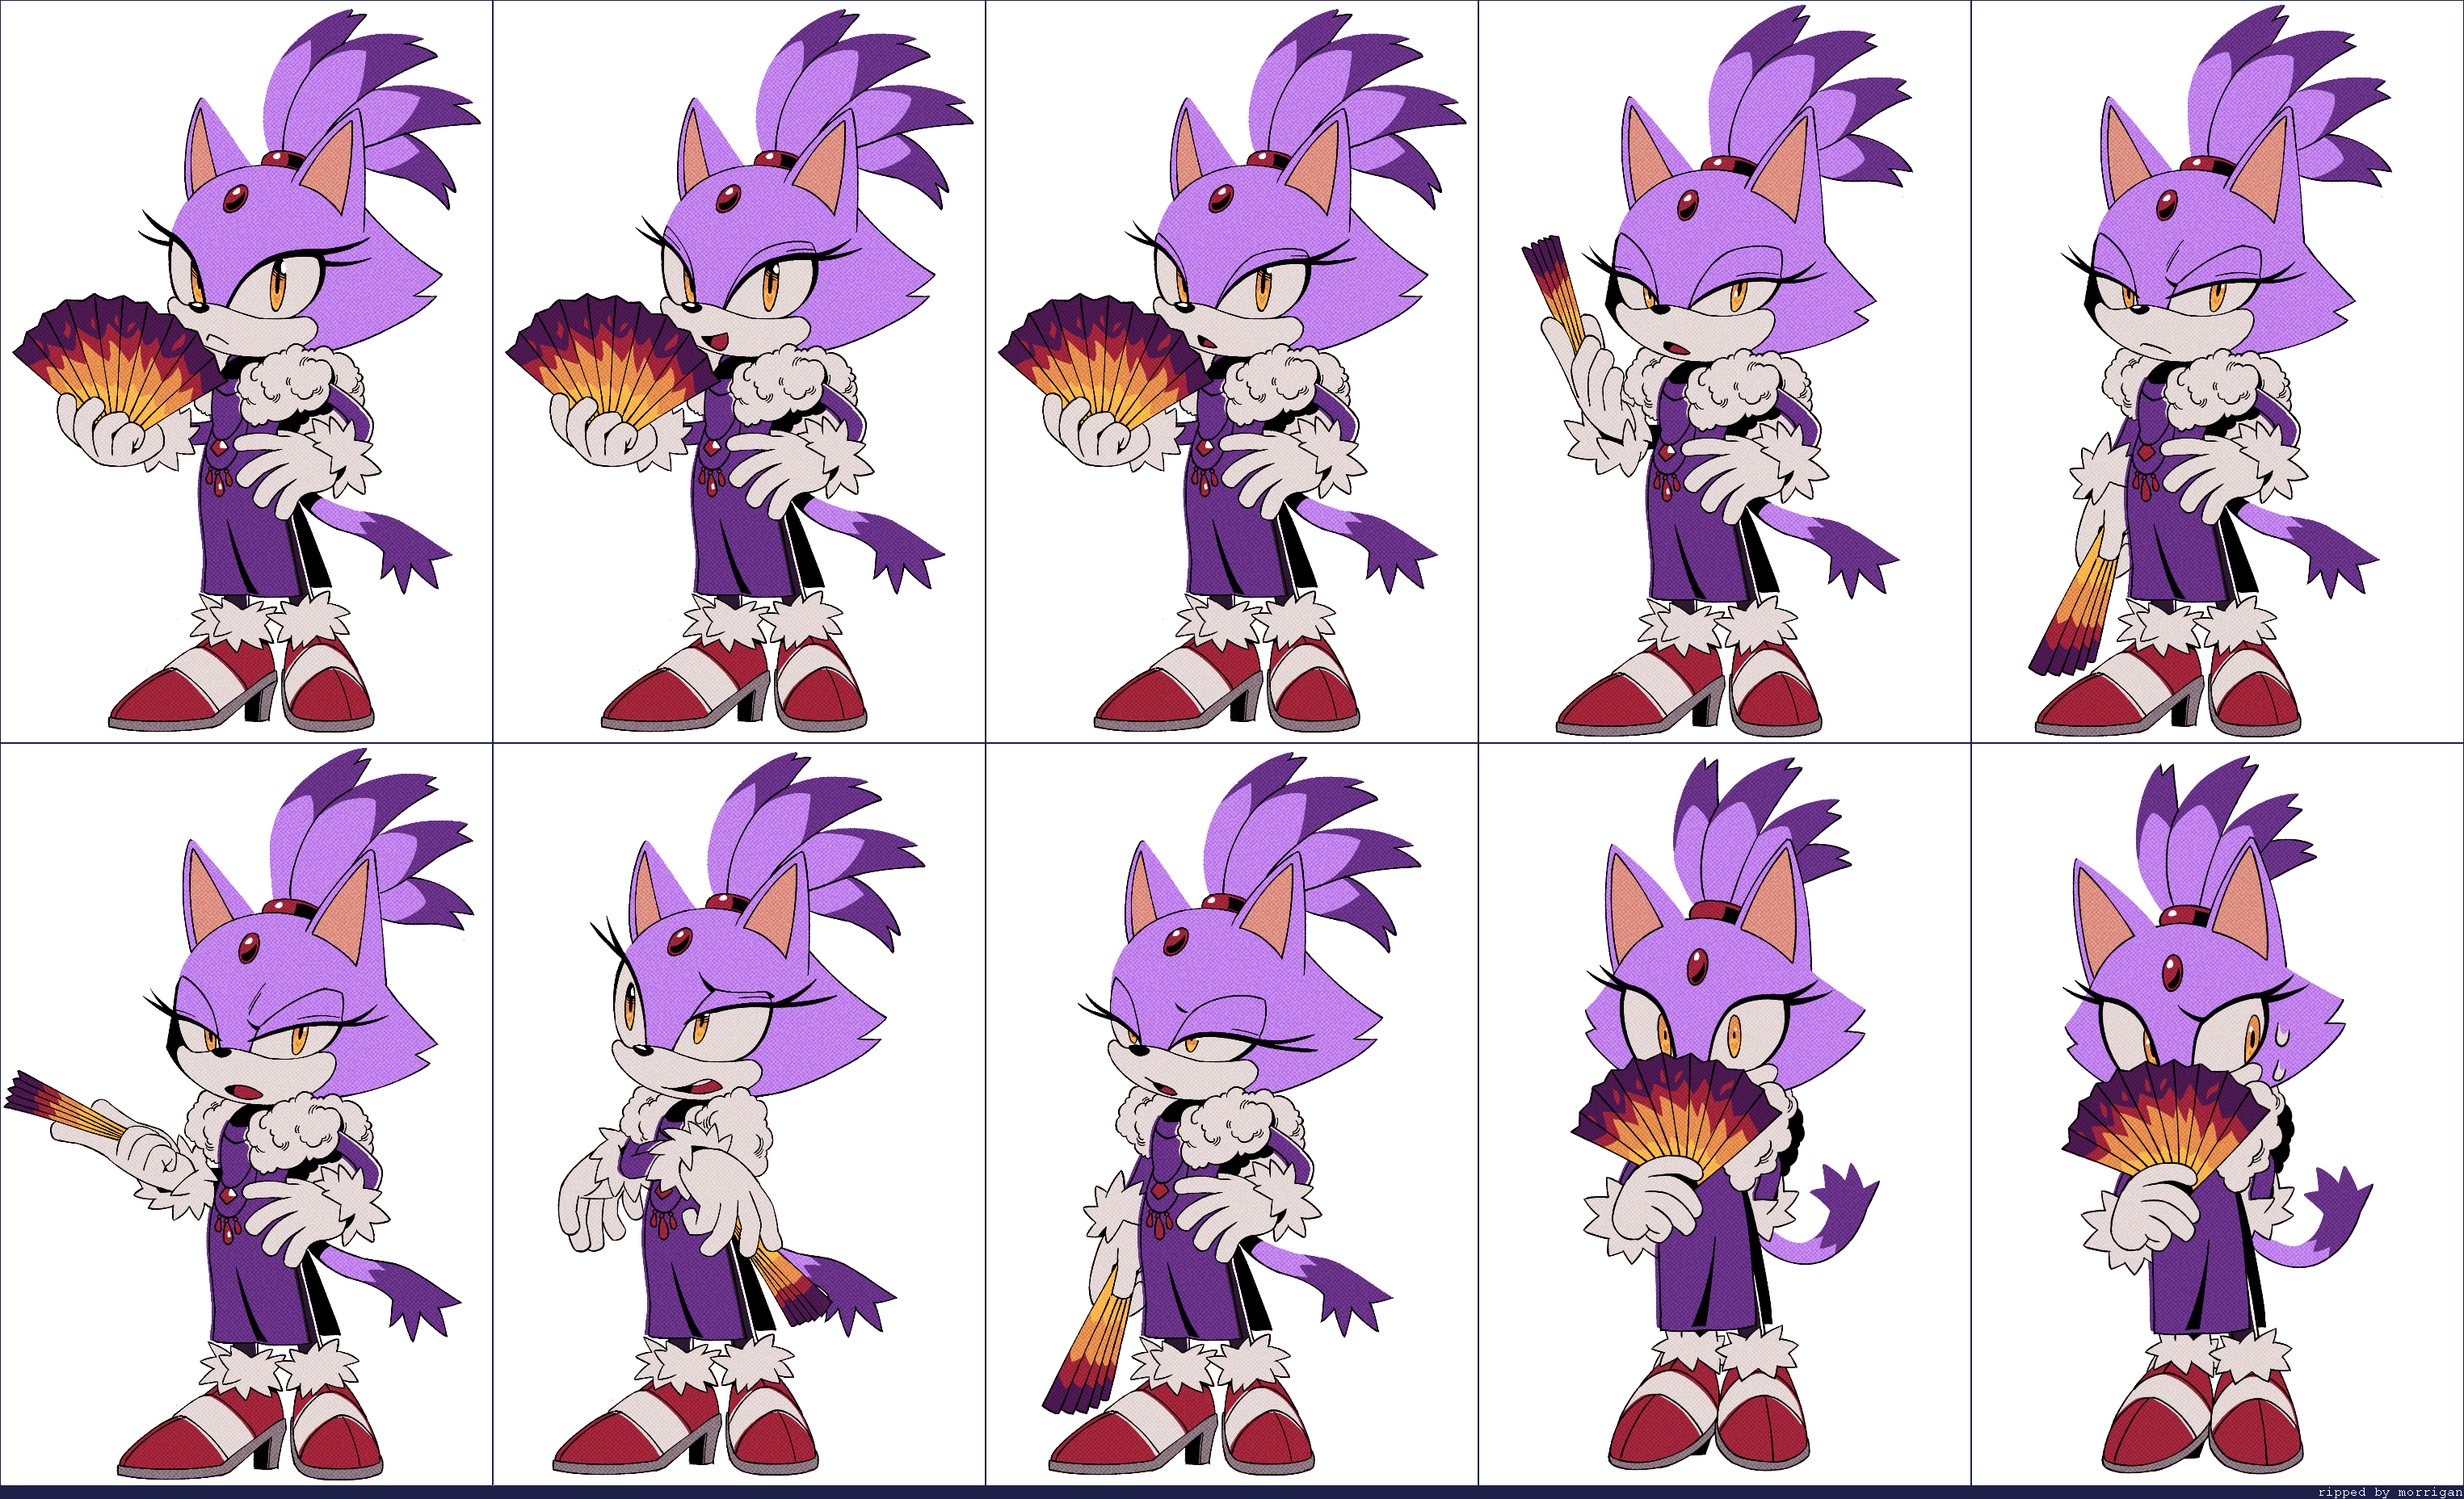 The Murder of Sonic the Hedgehog - Blaze the Cat